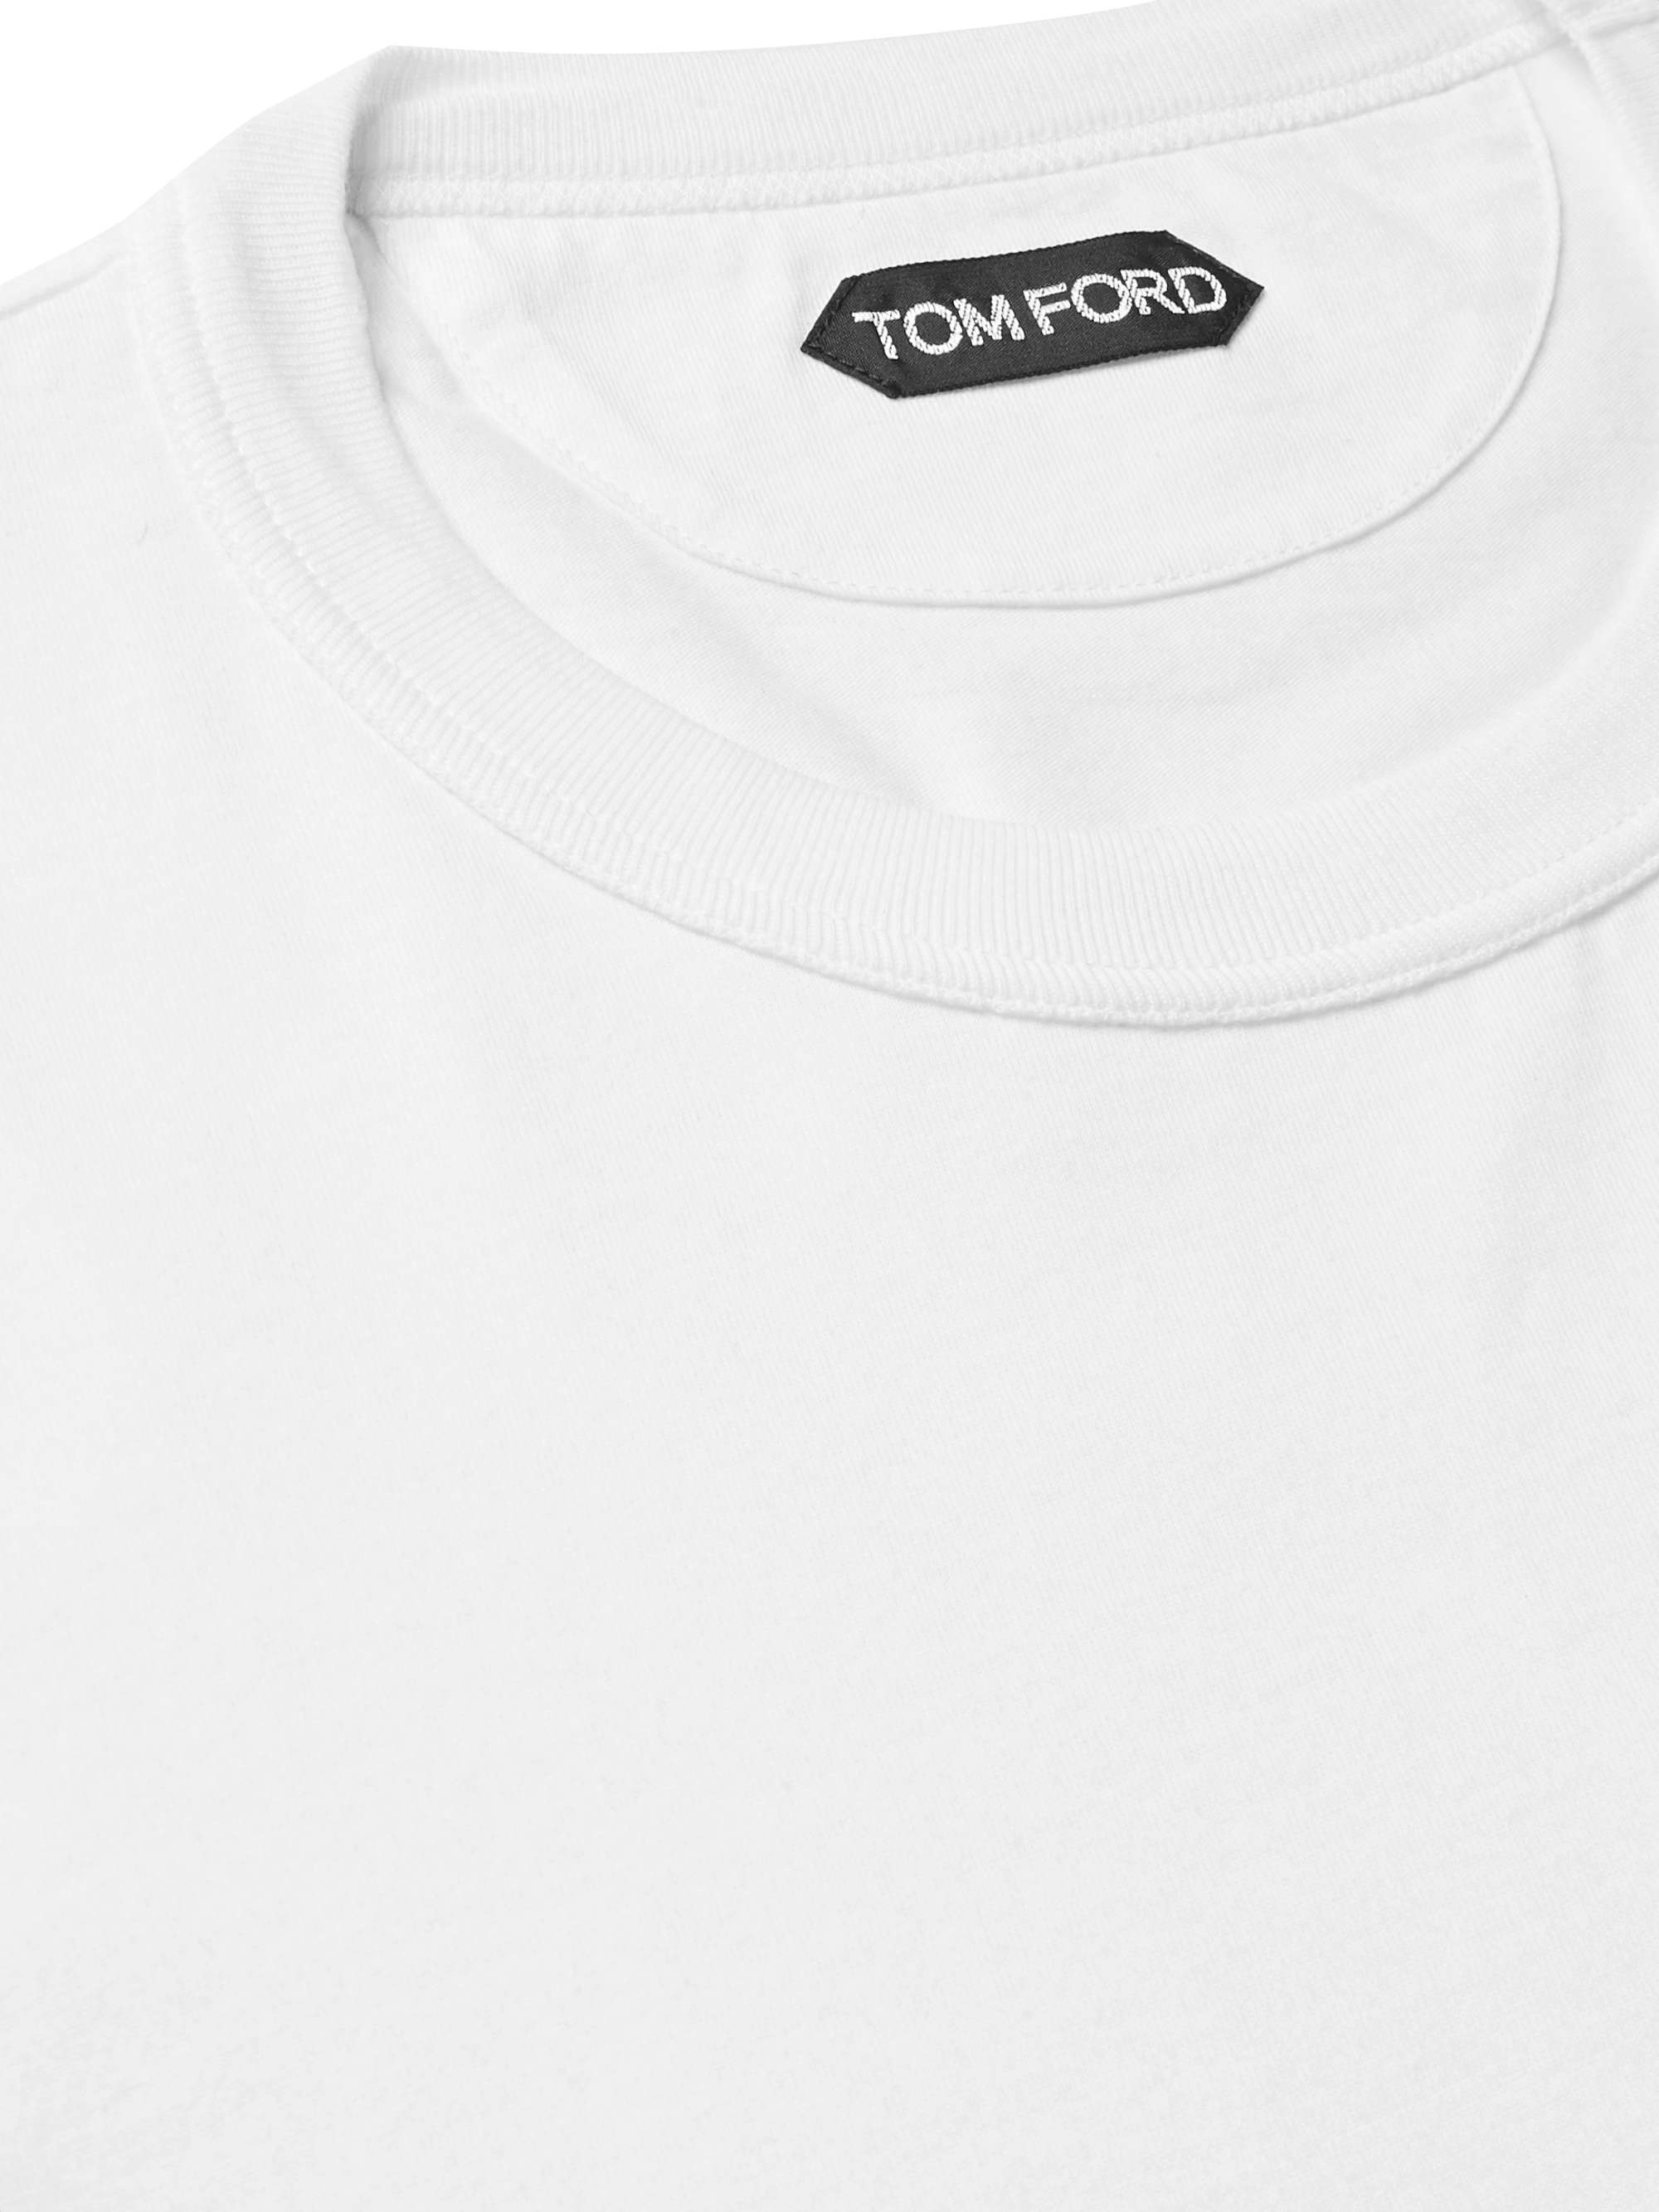 TOM FORD Cotton-Jersey T-Shirt